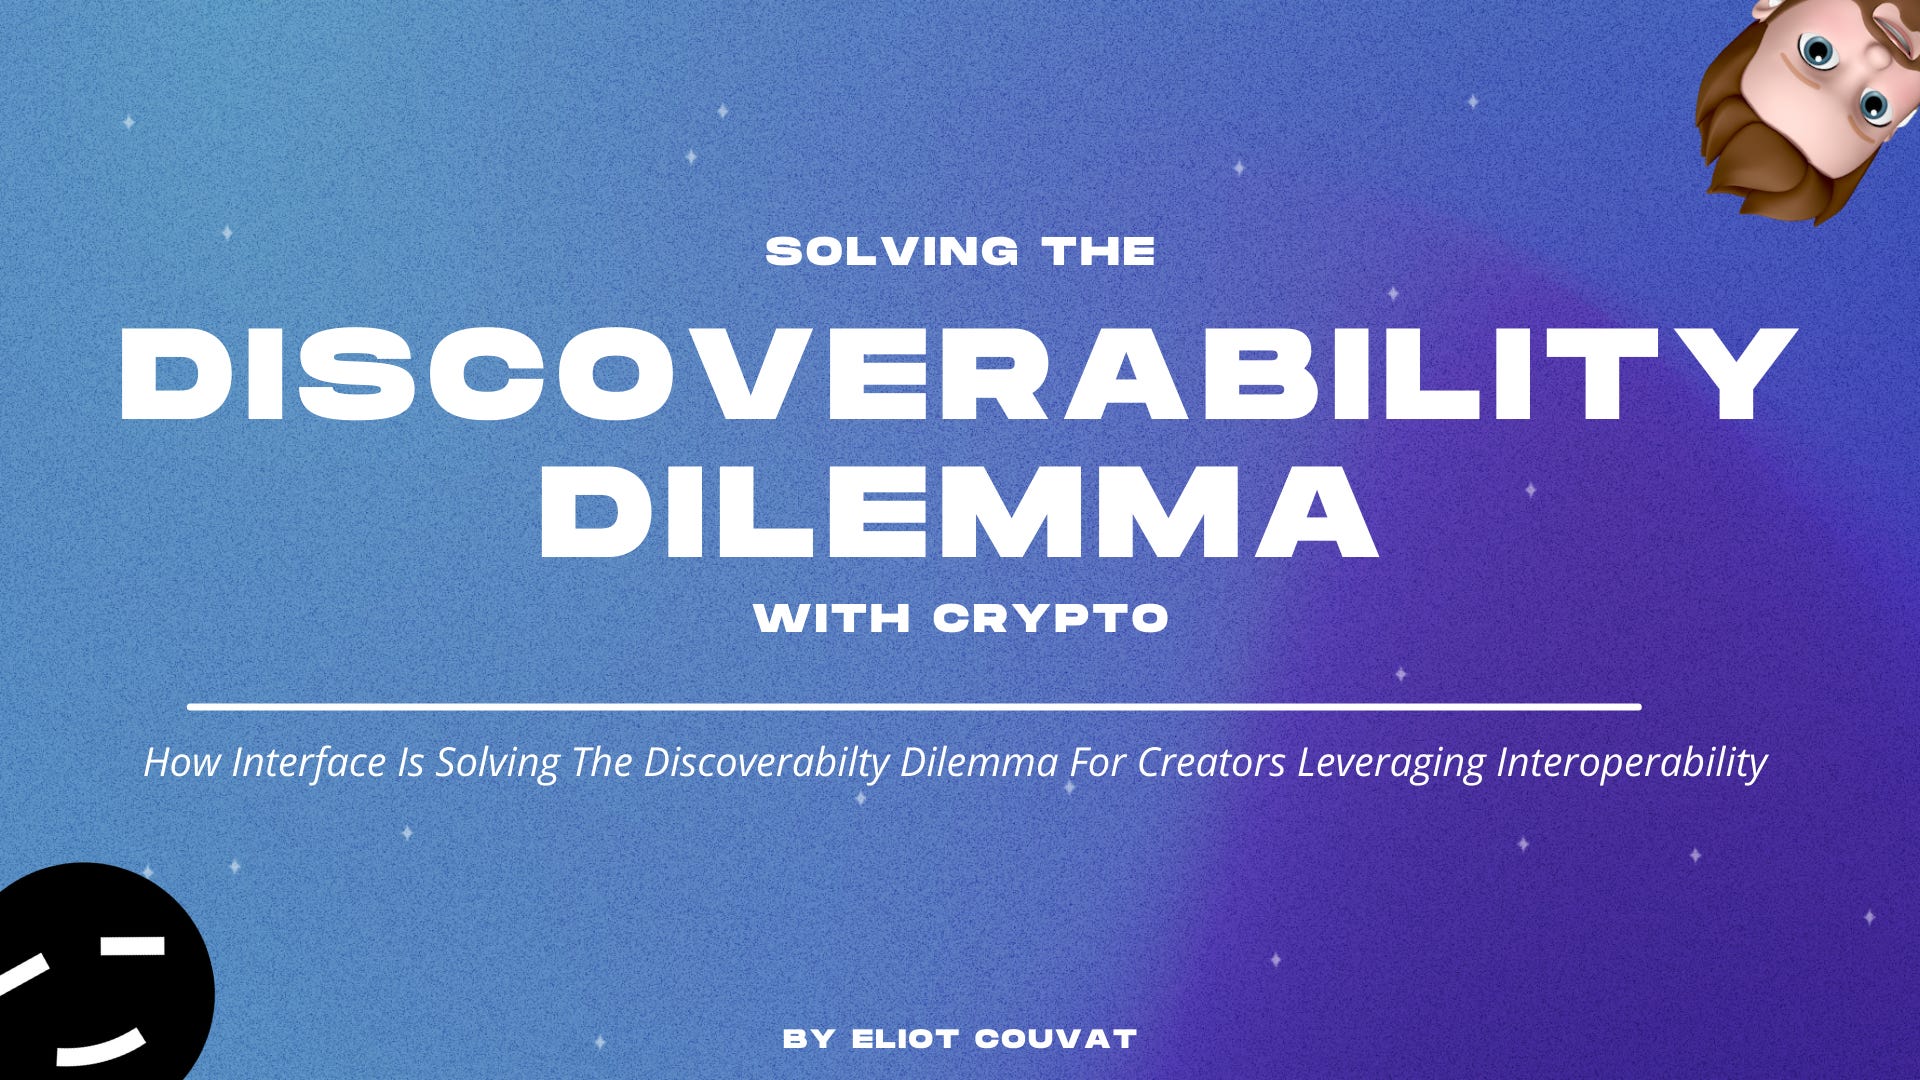 How Web3 Solves The Discoverability Dilemma For On-Chain Creators